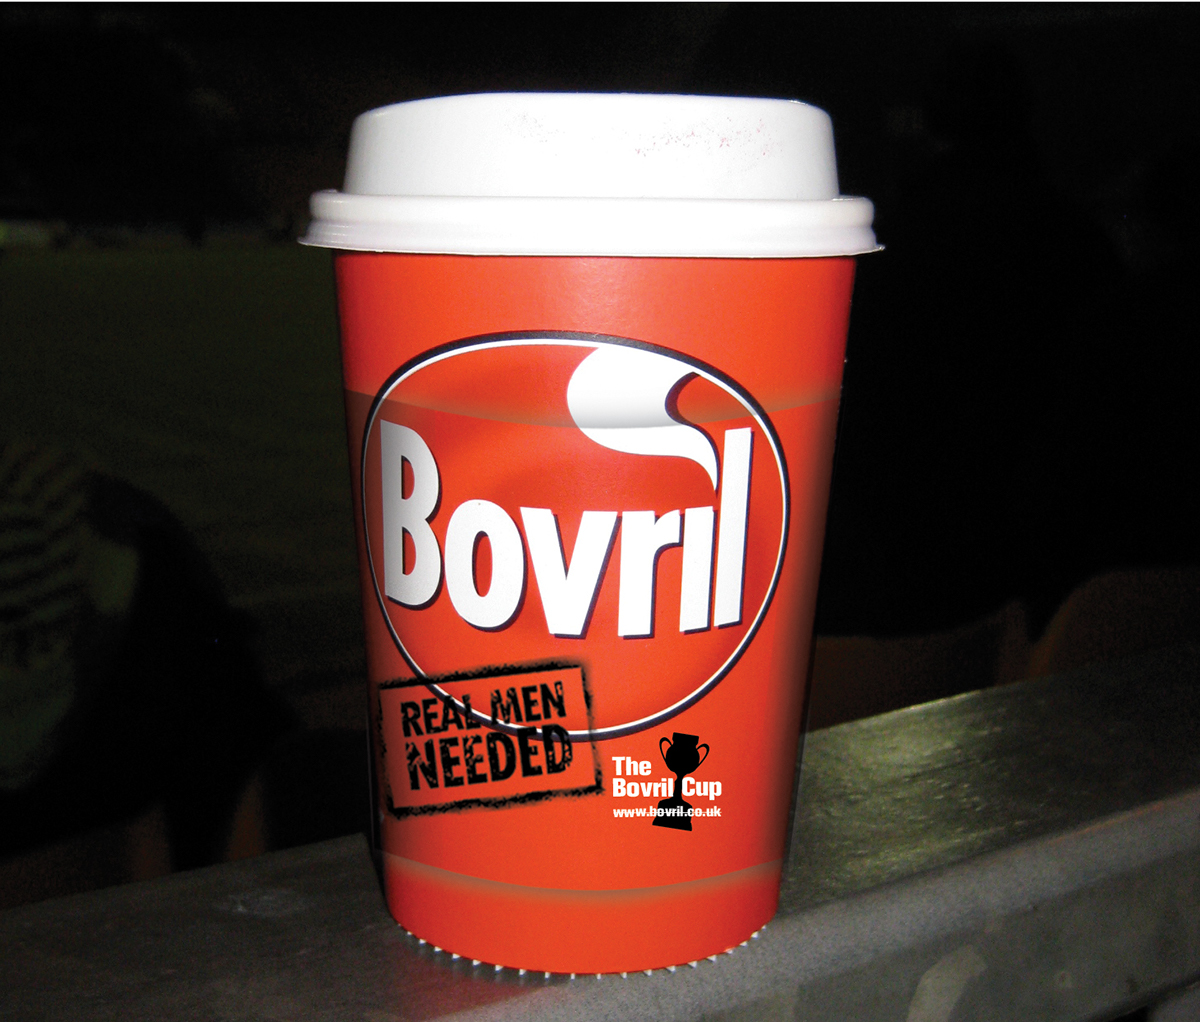 ad ad campaign soccer football man manly bovril bus stop